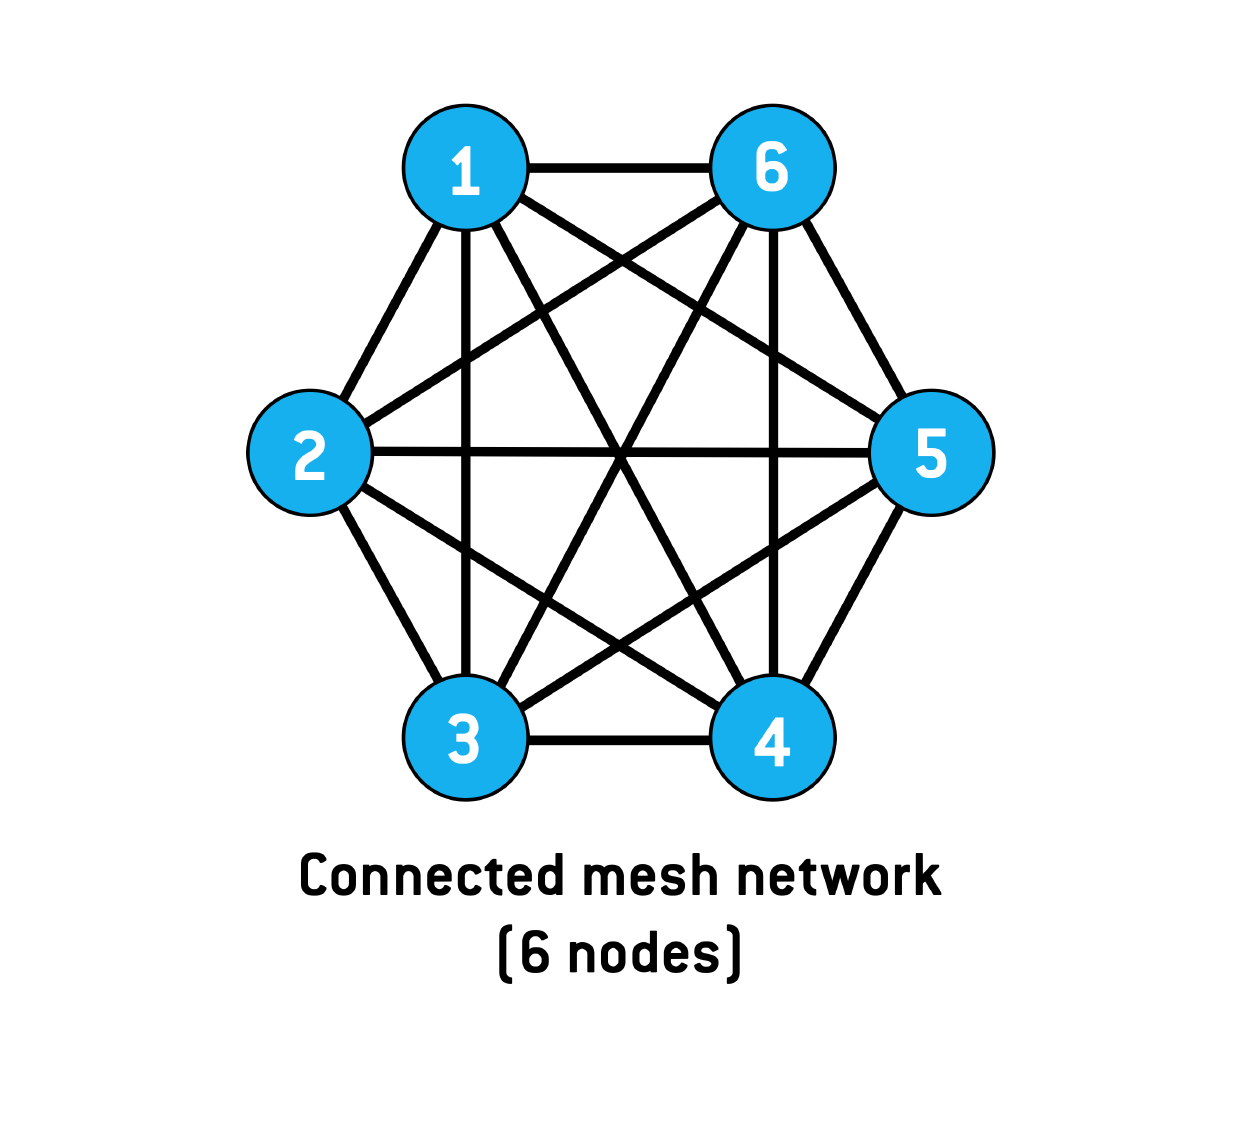 Mesh Network with 6 nodes